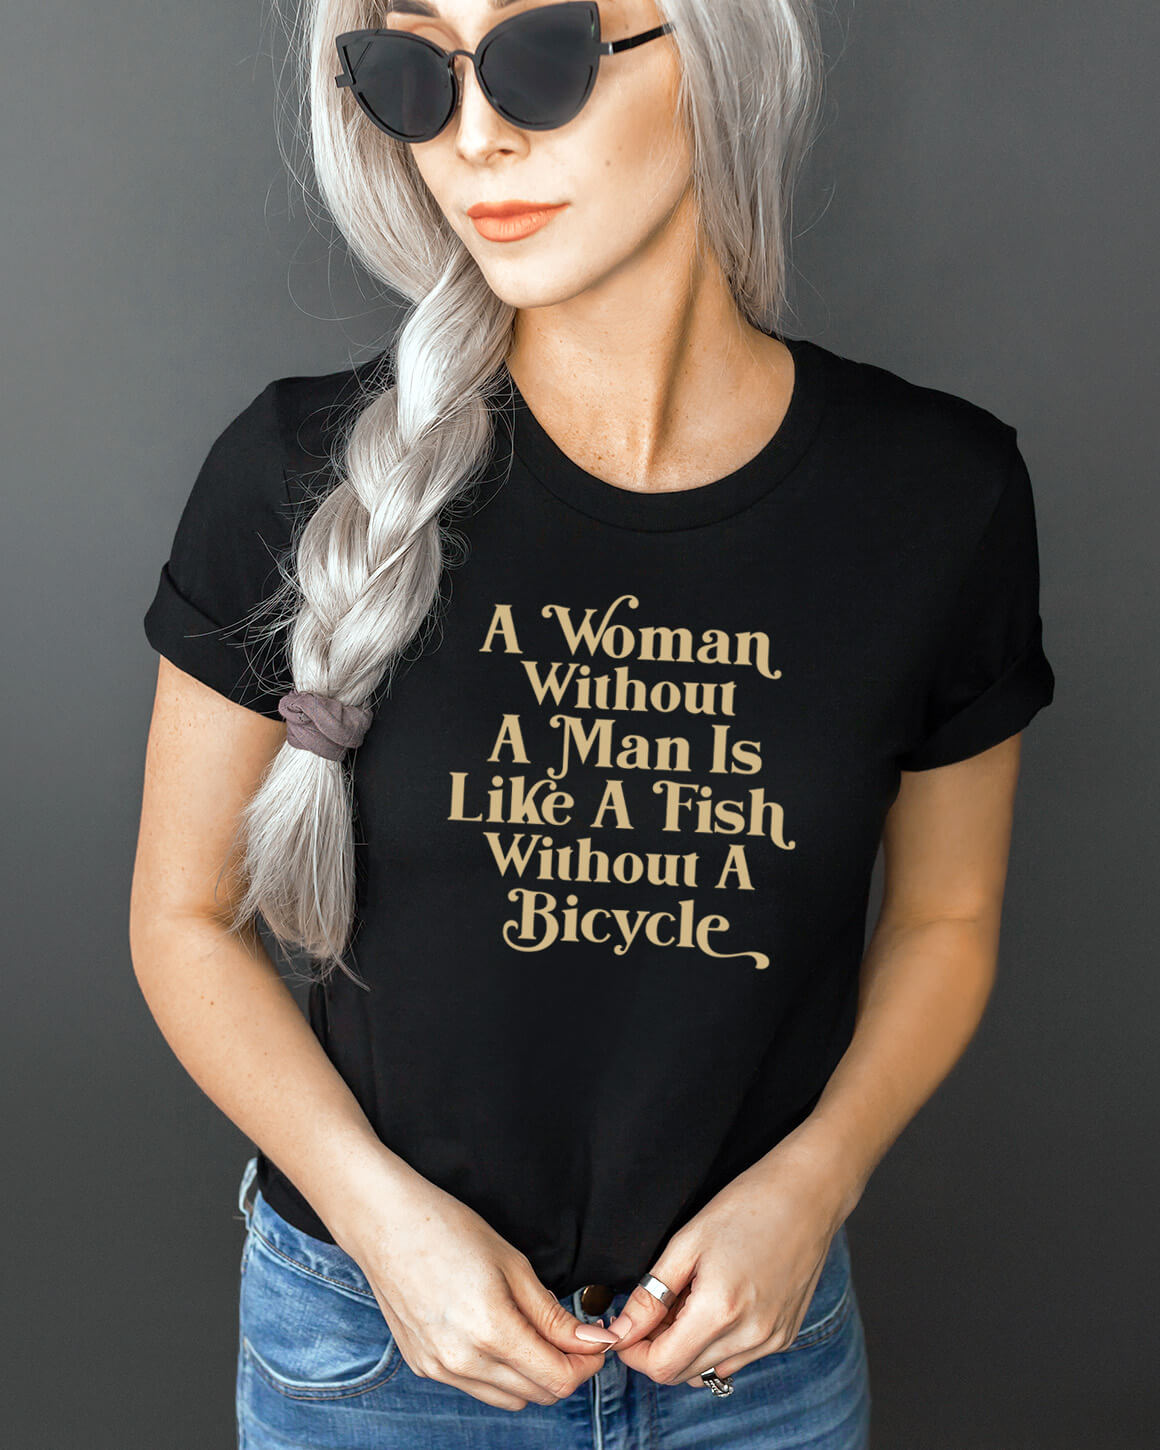 Women in black sunglasses and jeans wearing a funny feminist t-shirt